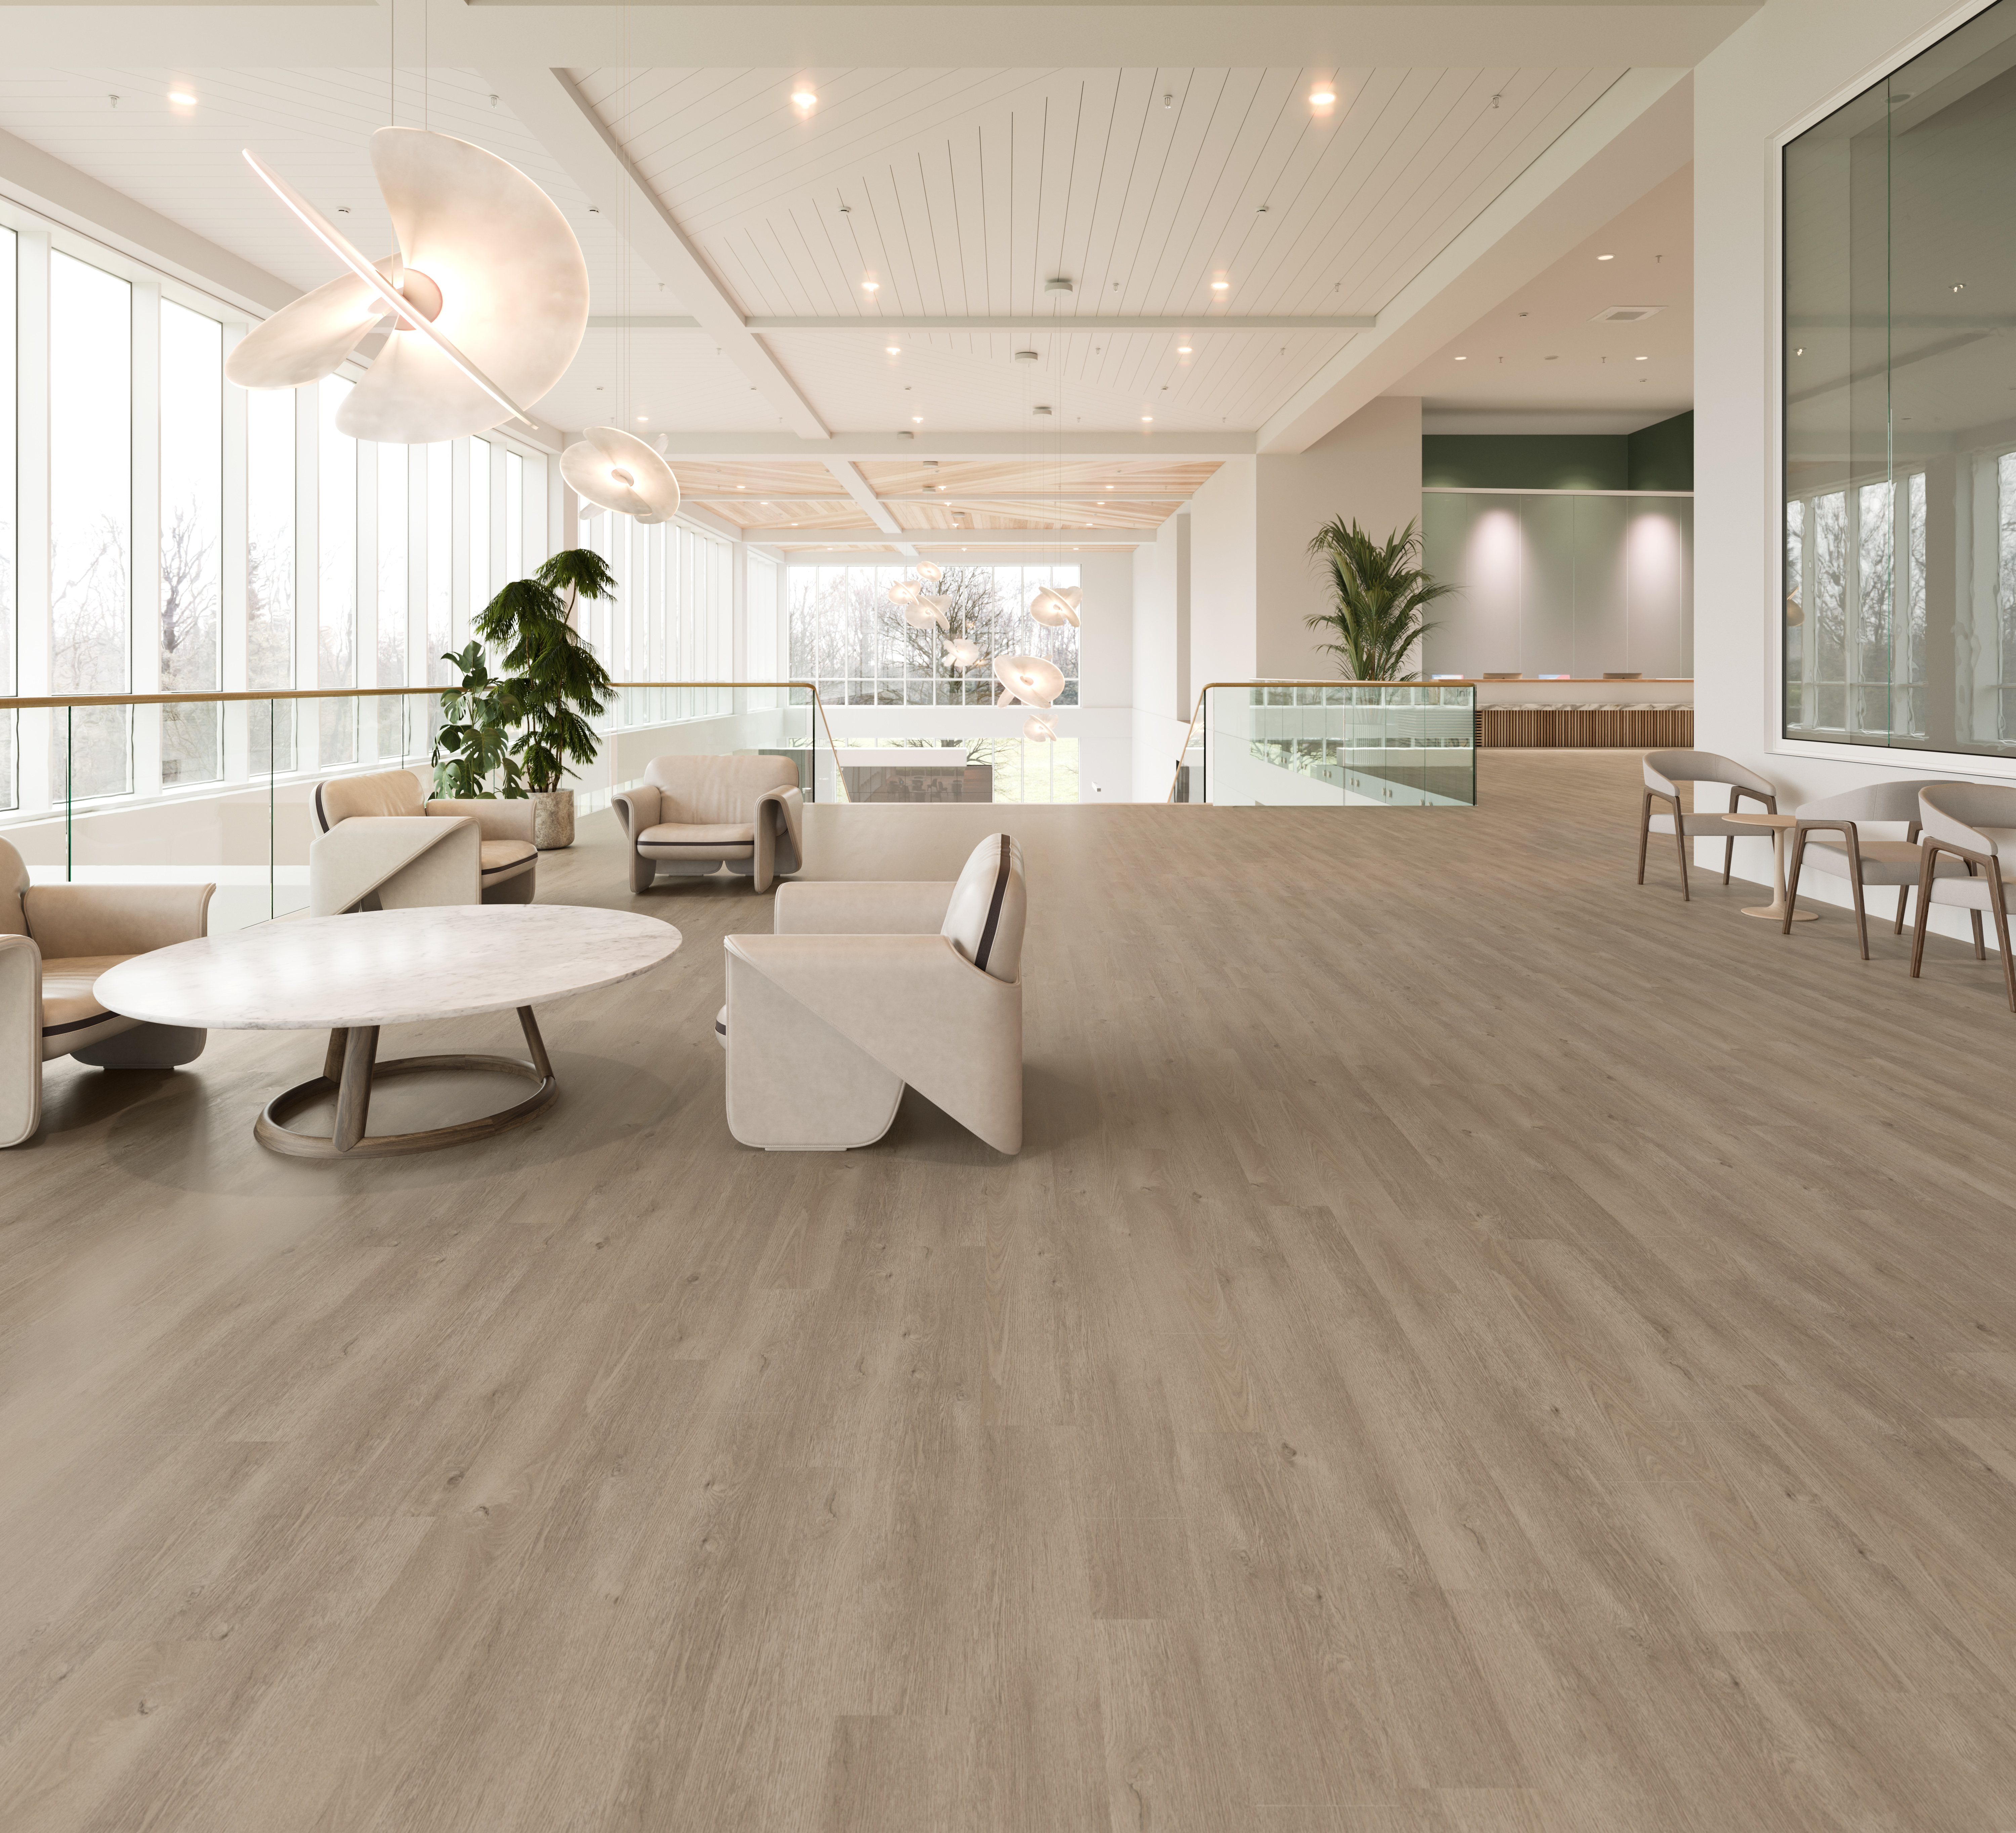 The new Proxy Collection is an innovative PVC-free resilient flooring collection that sets a high bar for sustainability and is a tangible demonstration of the company’s commitment to leading the industry in environmental and social responsibility standards.
